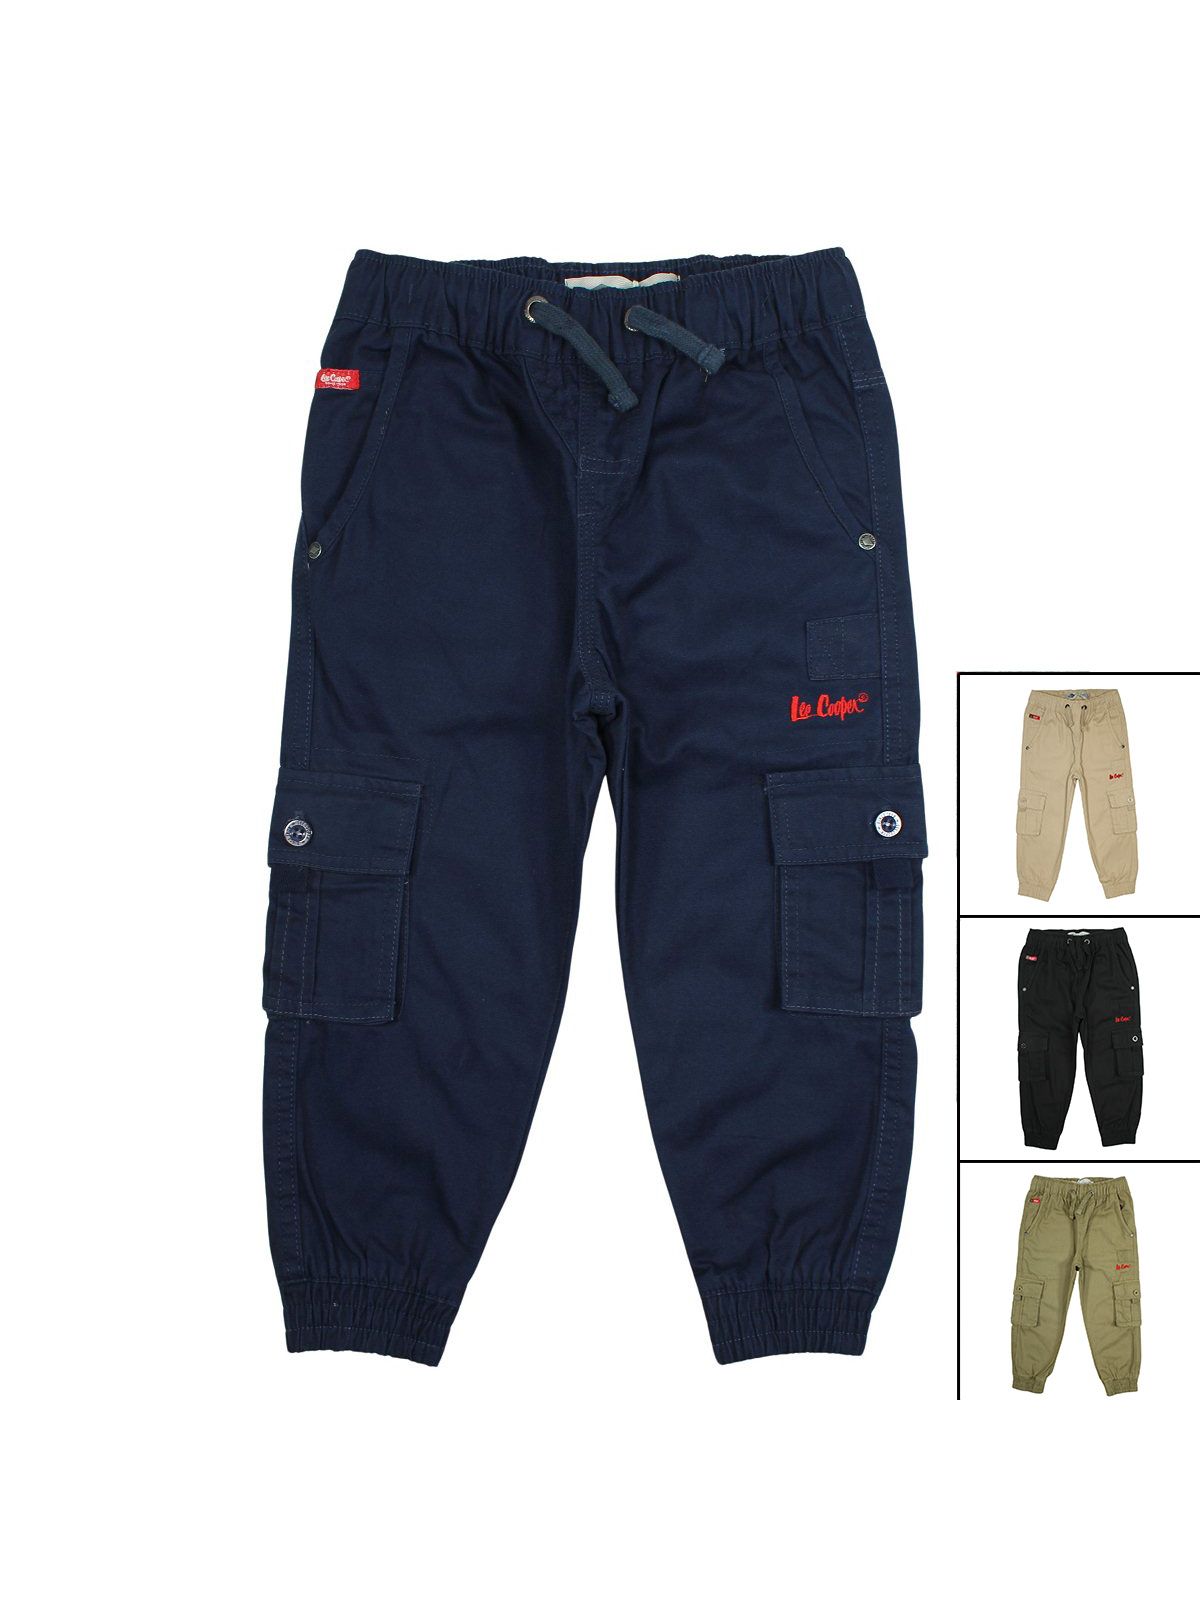 Lee Cooper Workwear Trousers - Cotton Graphics